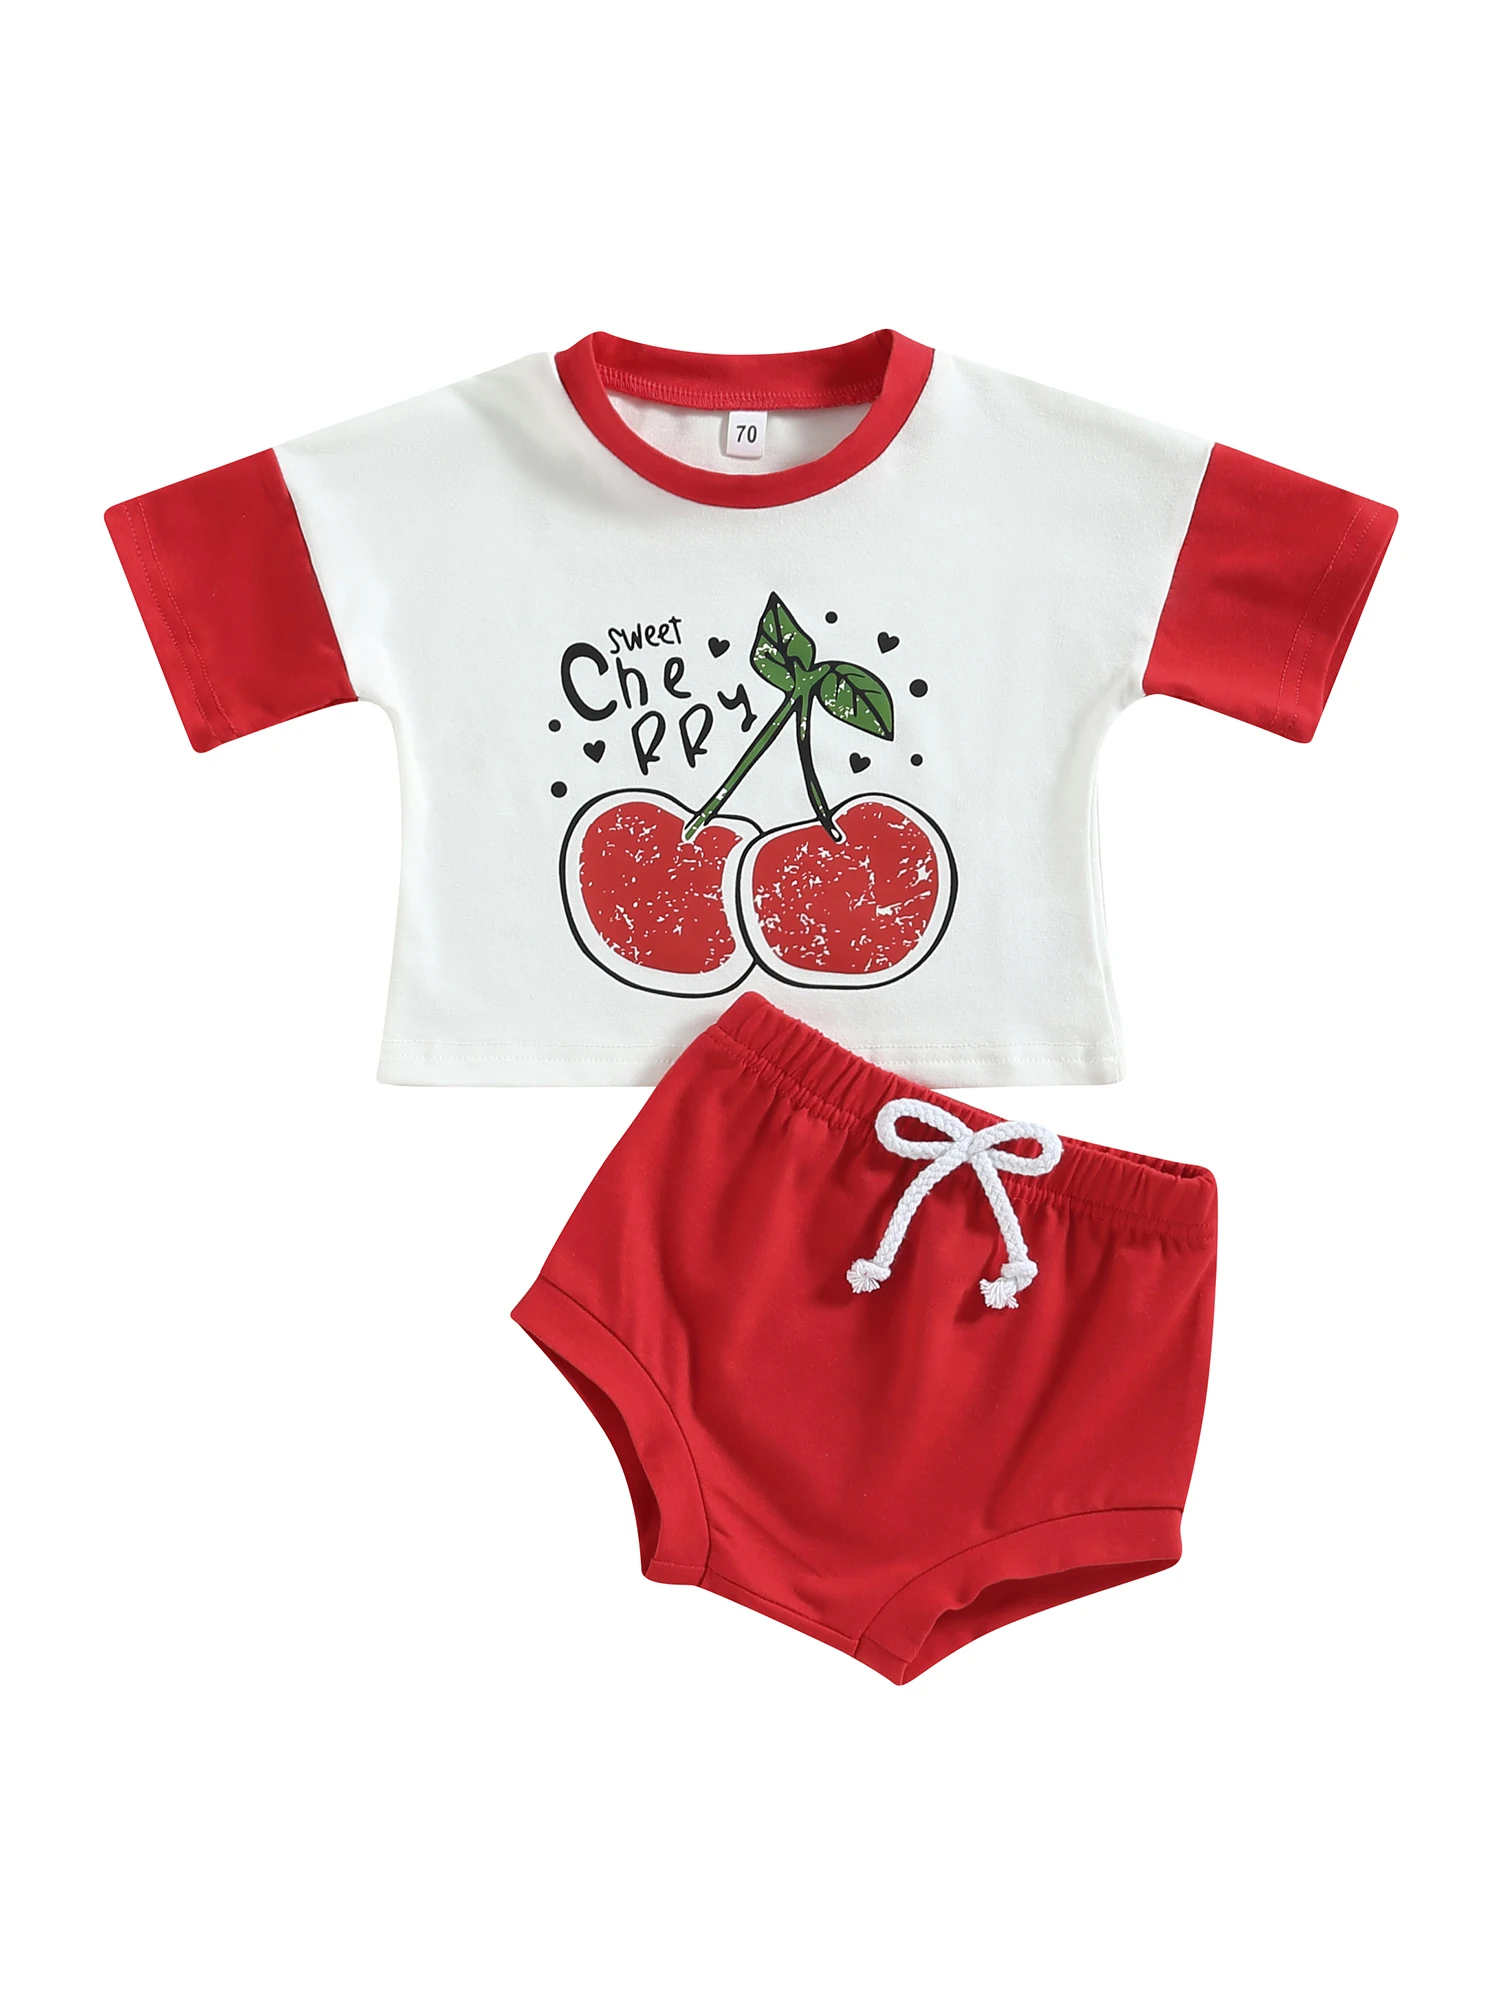 Baby Girls Summer Outfit Cute Fruit Letter Print Short Sleeve T-Shirt Top Elastic Casual Shorts Casual Matching Clothes Set